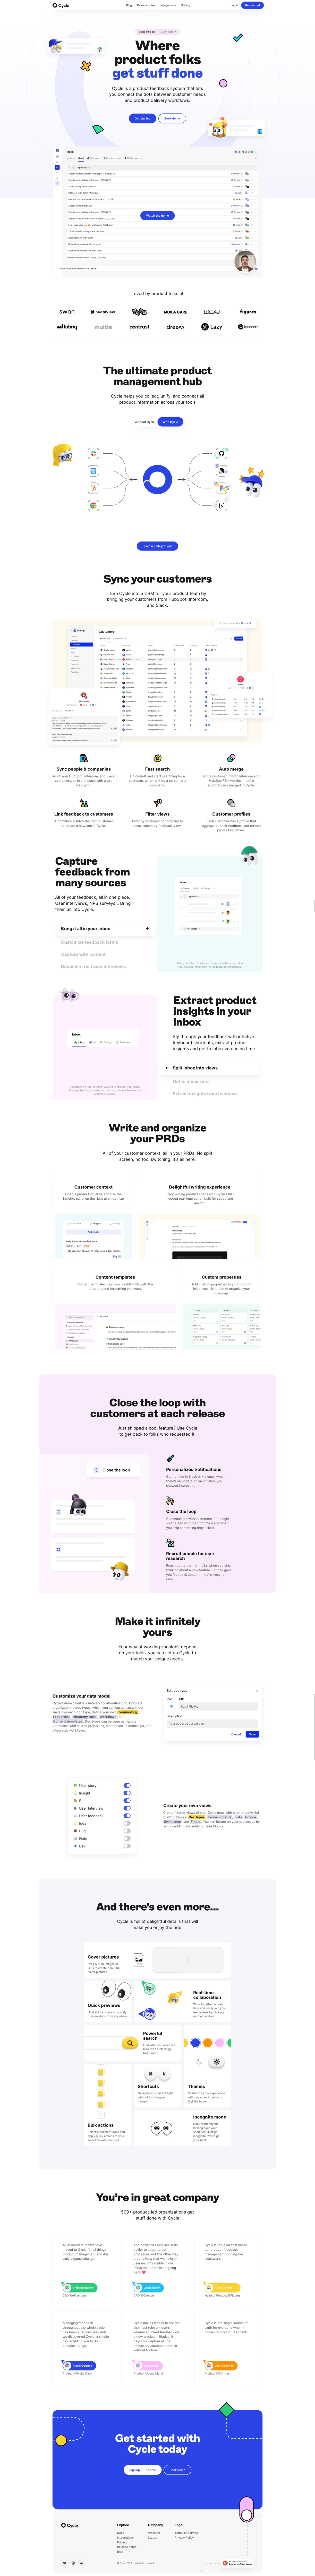 Cycle Landing Page Example: Where product folks get stuff done. Cycle is a product feedback system that lets you connect the dots between customer needs and product delivery workflows.